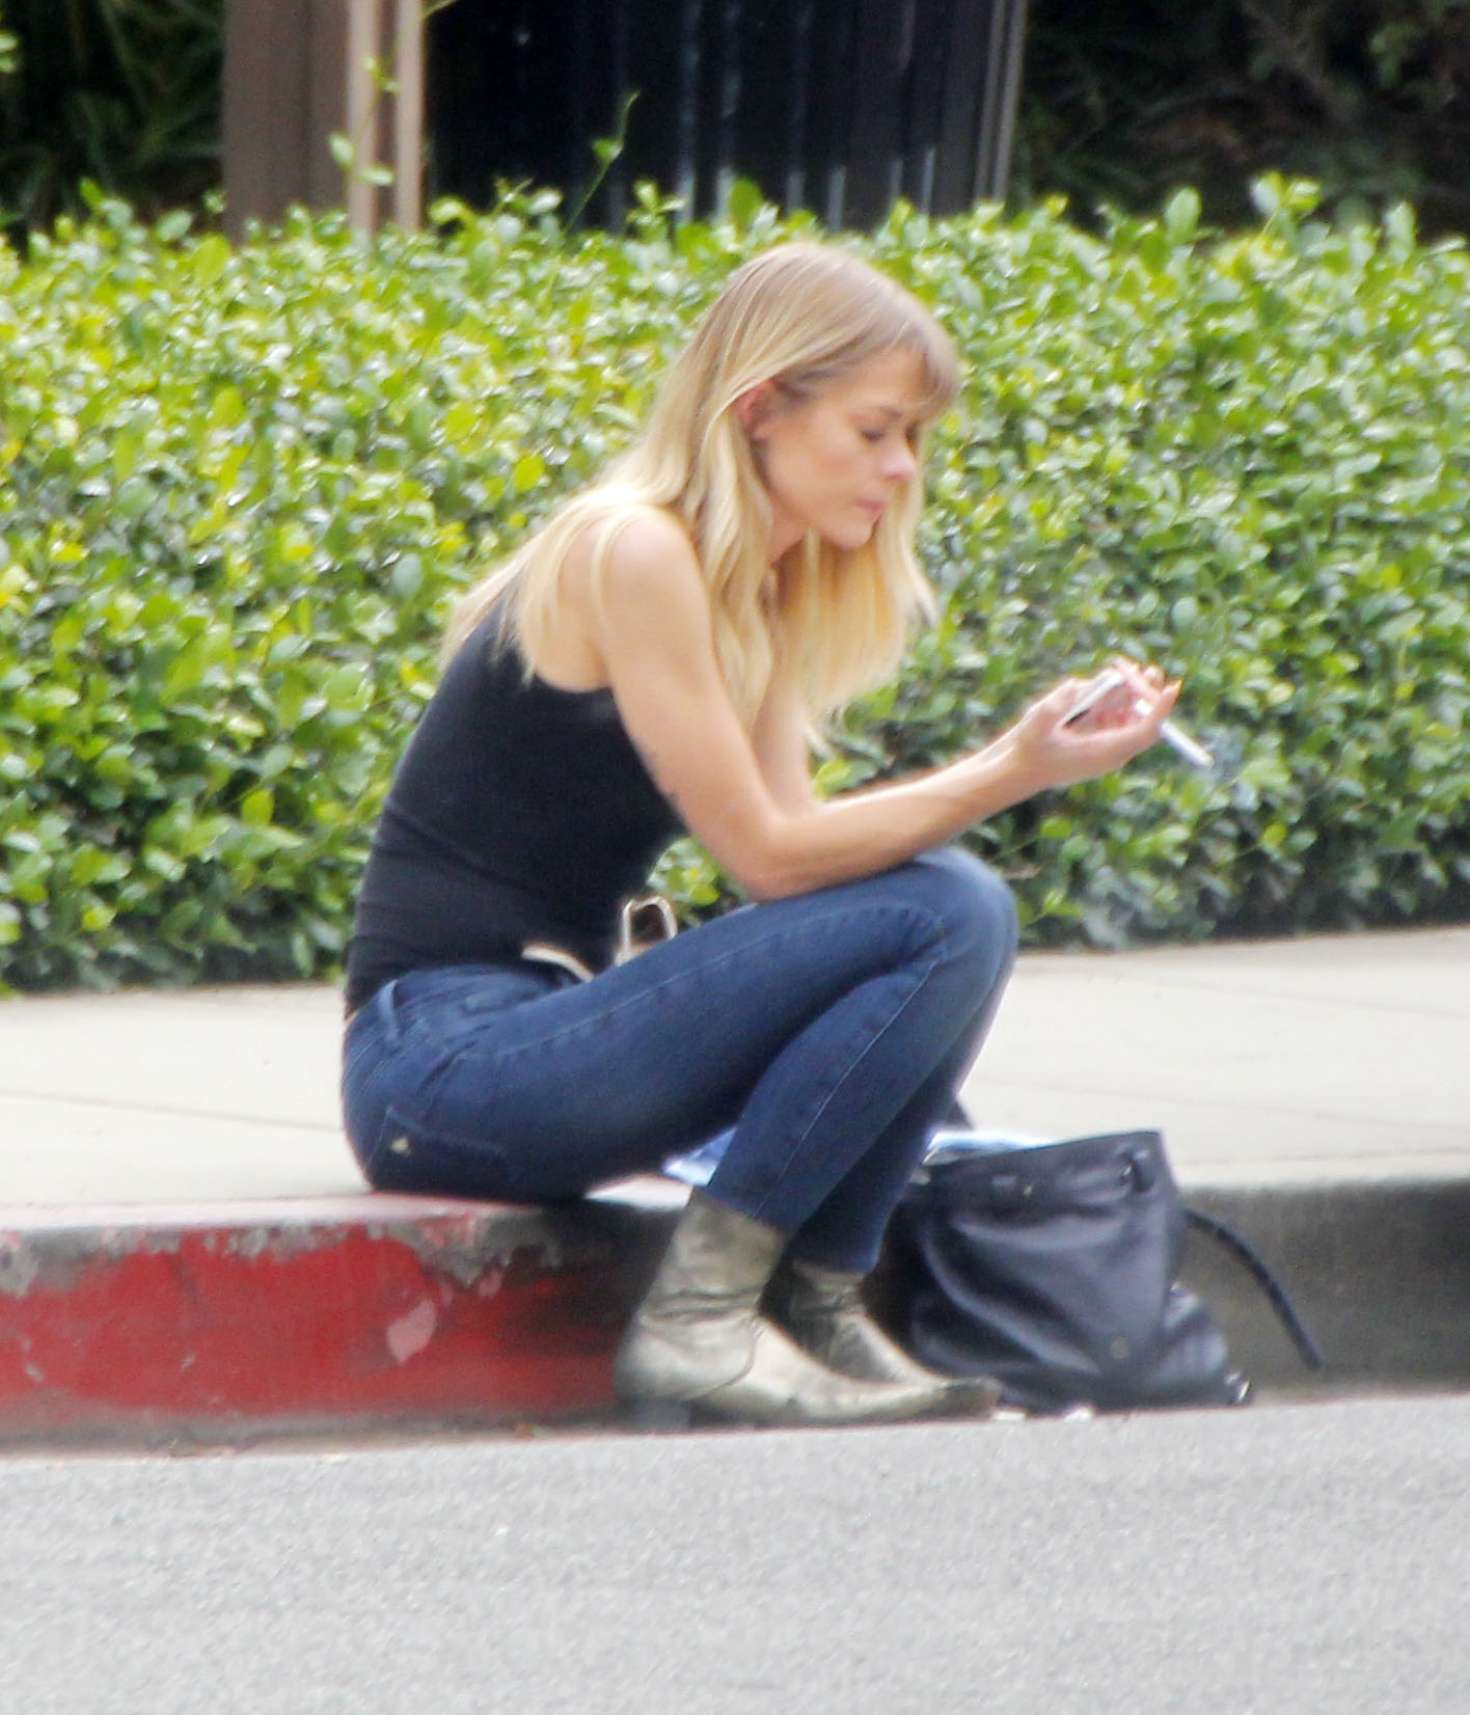 Jaime King out in LA